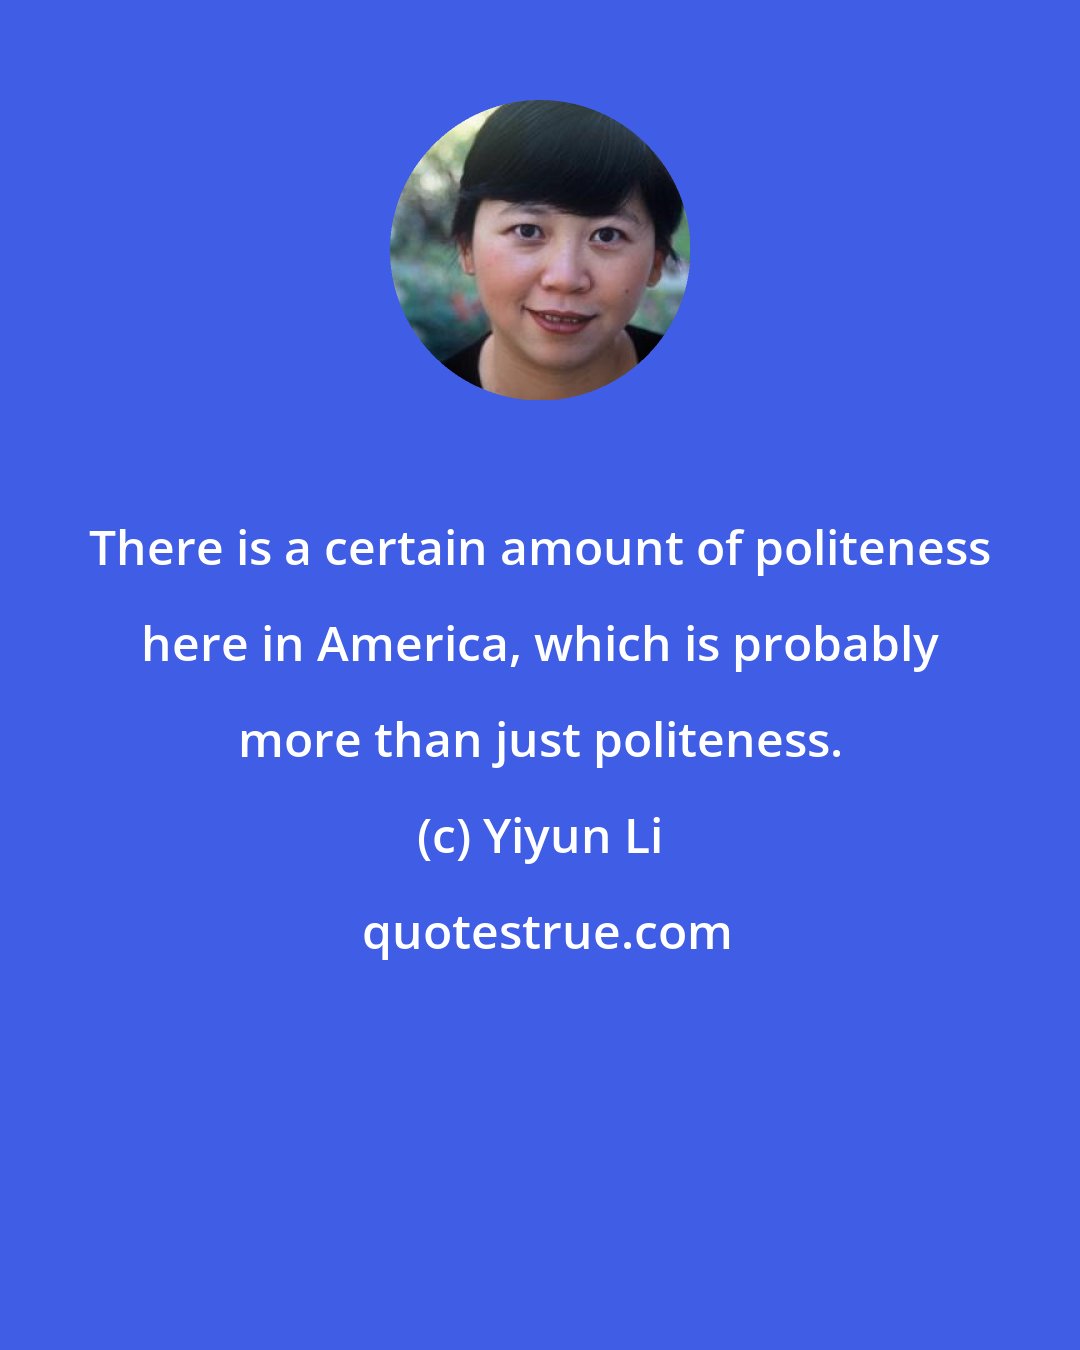 Yiyun Li: There is a certain amount of politeness here in America, which is probably more than just politeness.